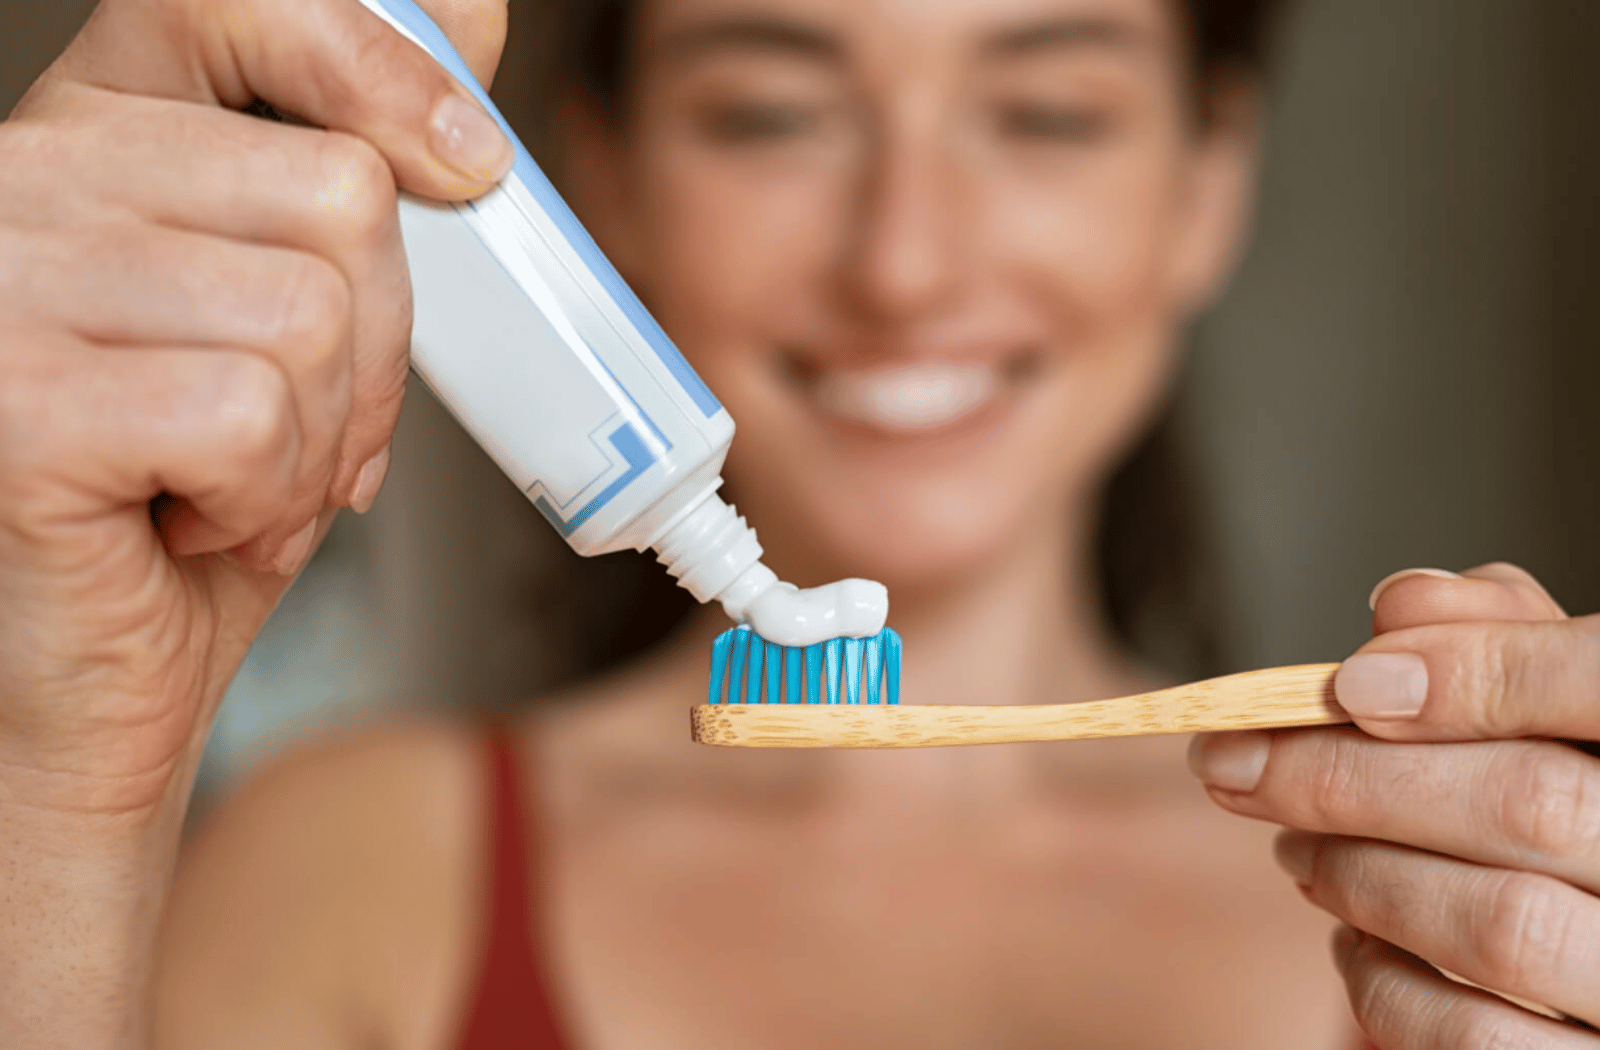 A woman puts toothpaste onto her toothbrush.